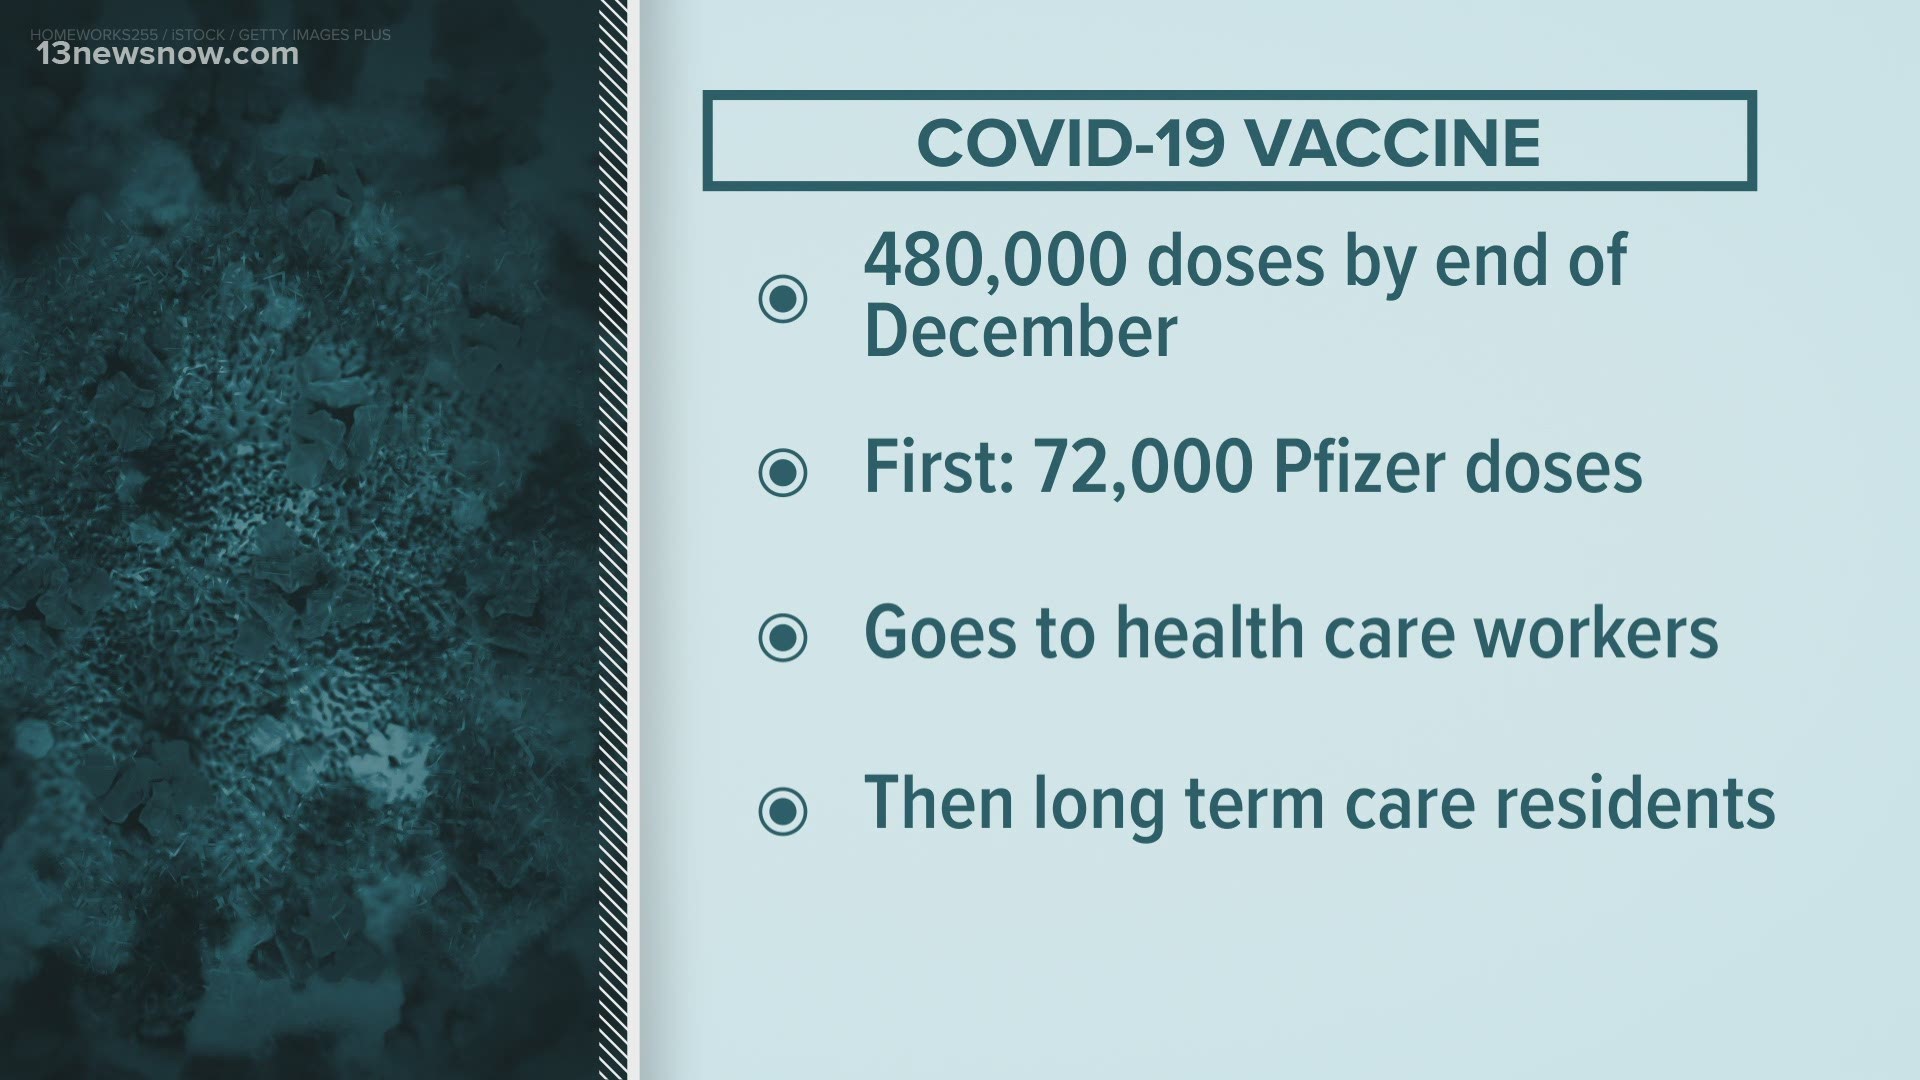 The VDH says the first shipment will be about 72,000 doses from Pfizer, and that the first round will go to healthcare workers who care for COVID-19 patients.